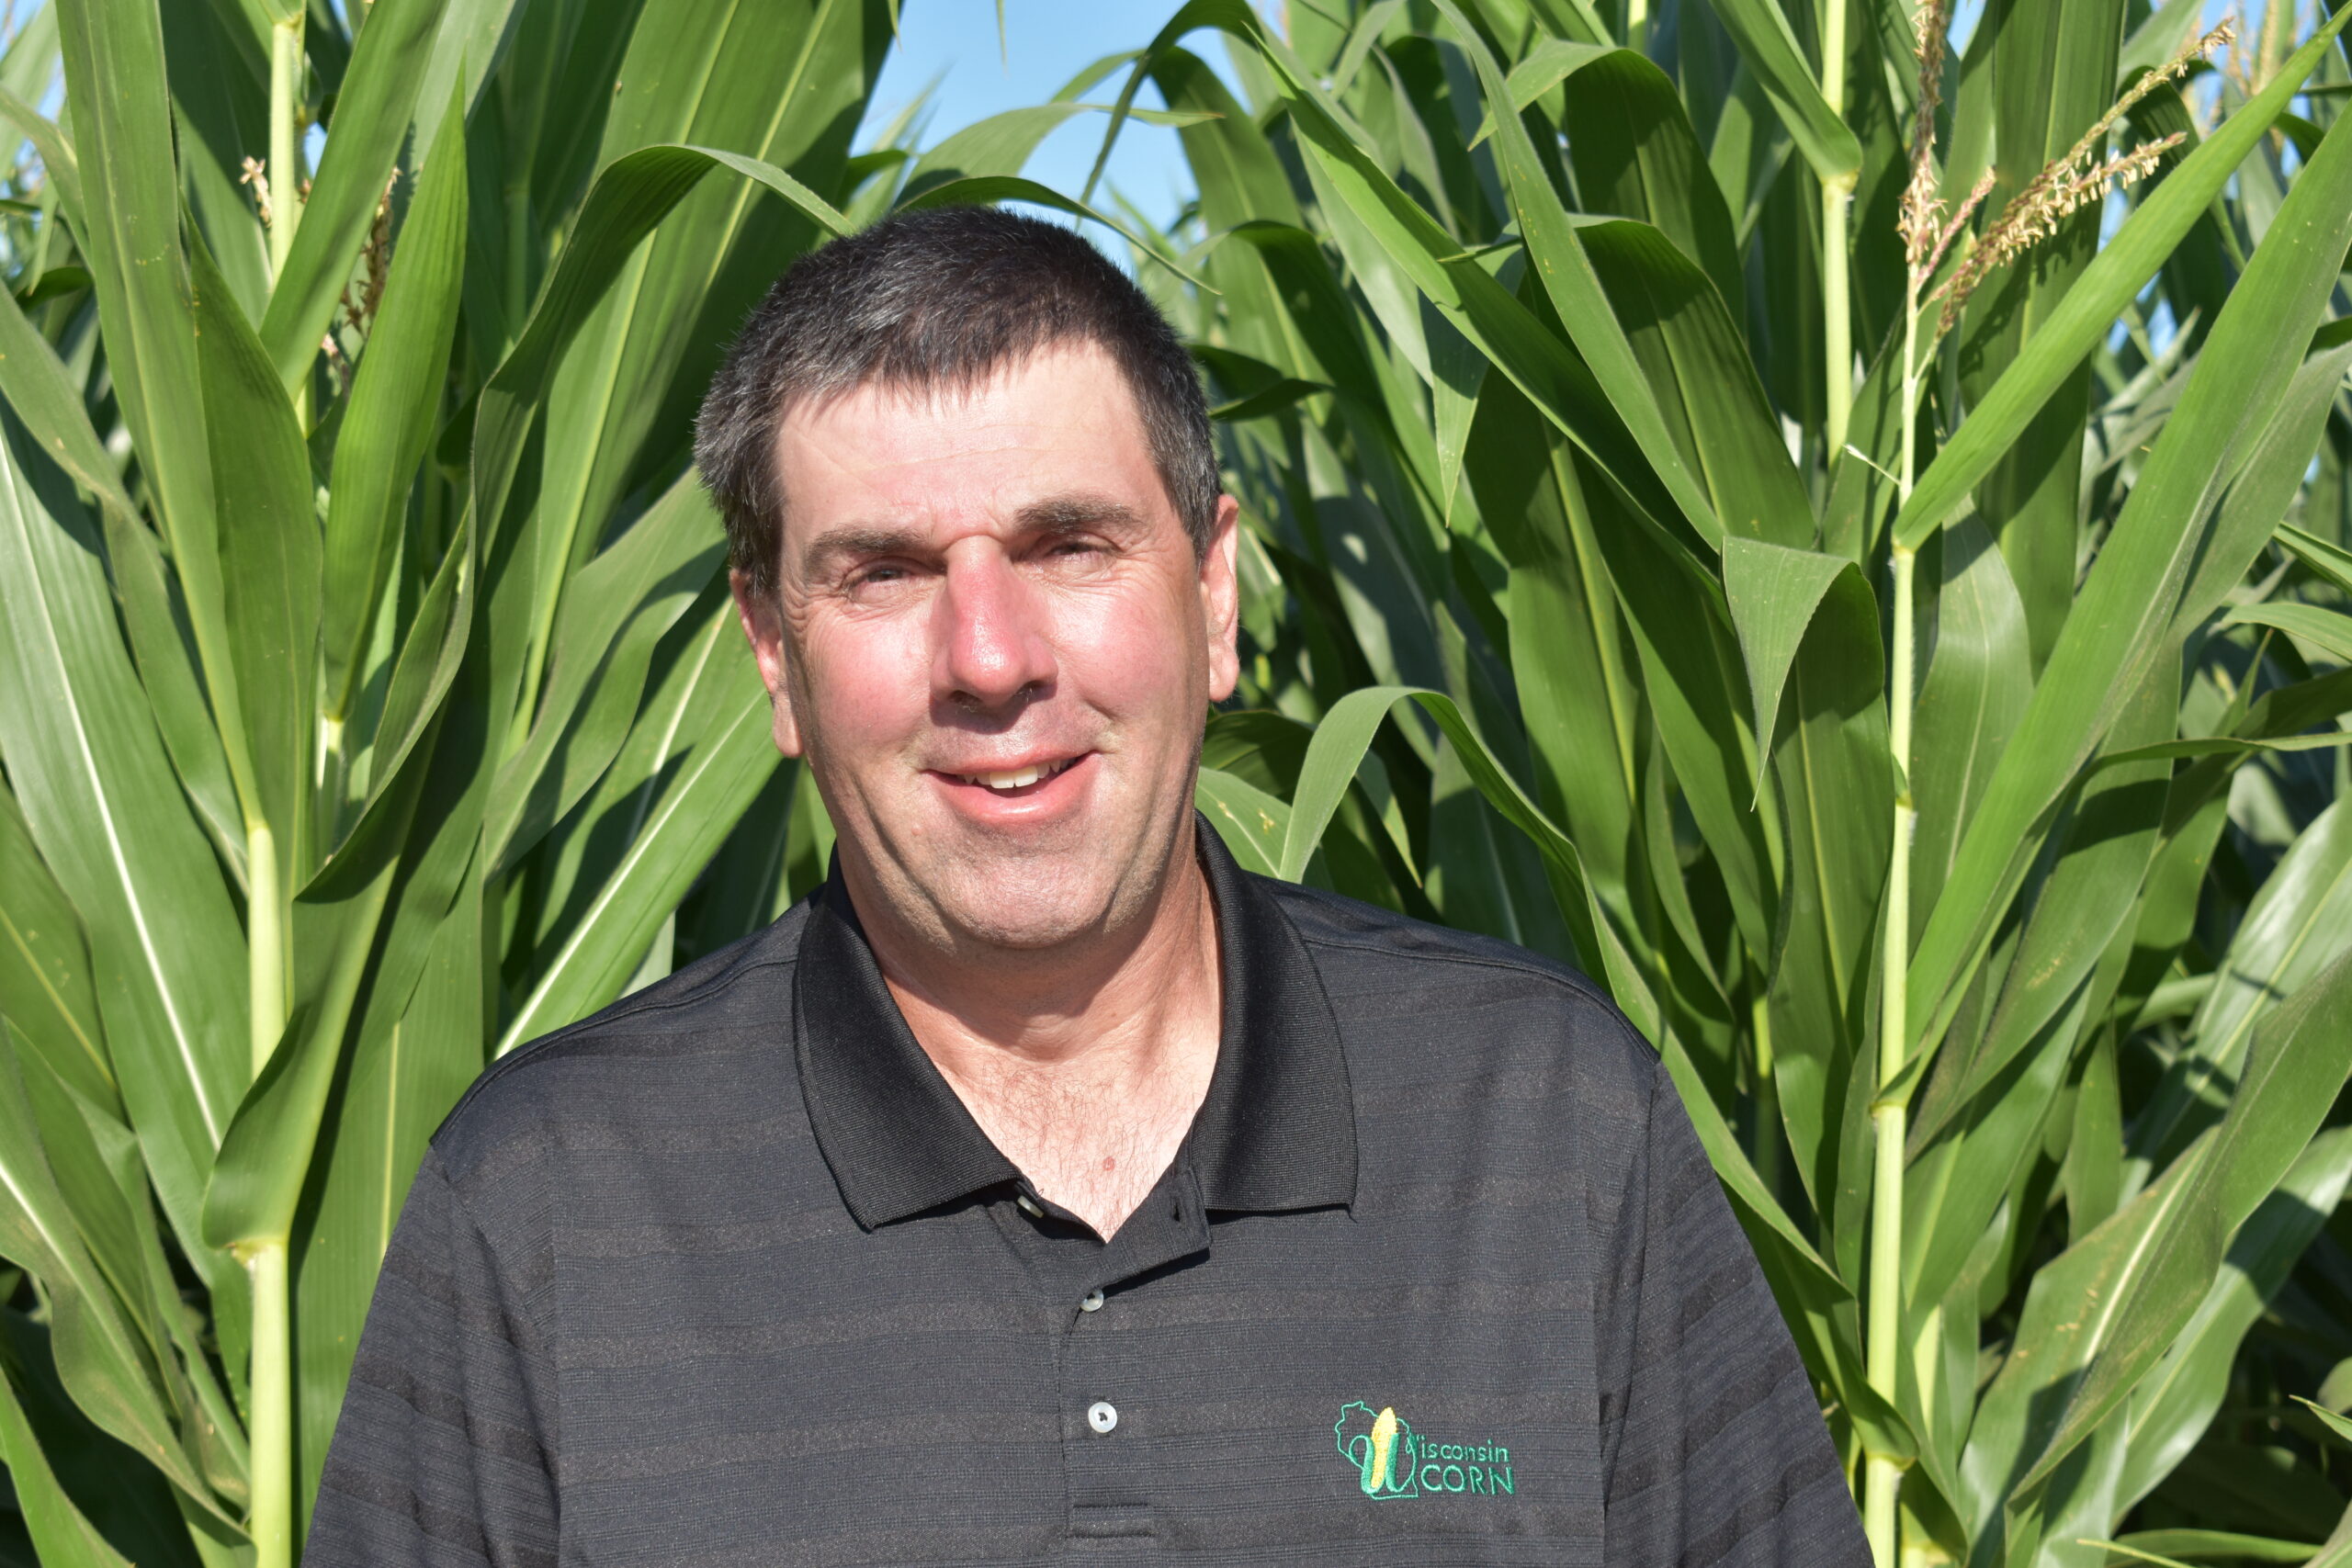 Wisconsin Corn Growers Association applauds Rebout appointment